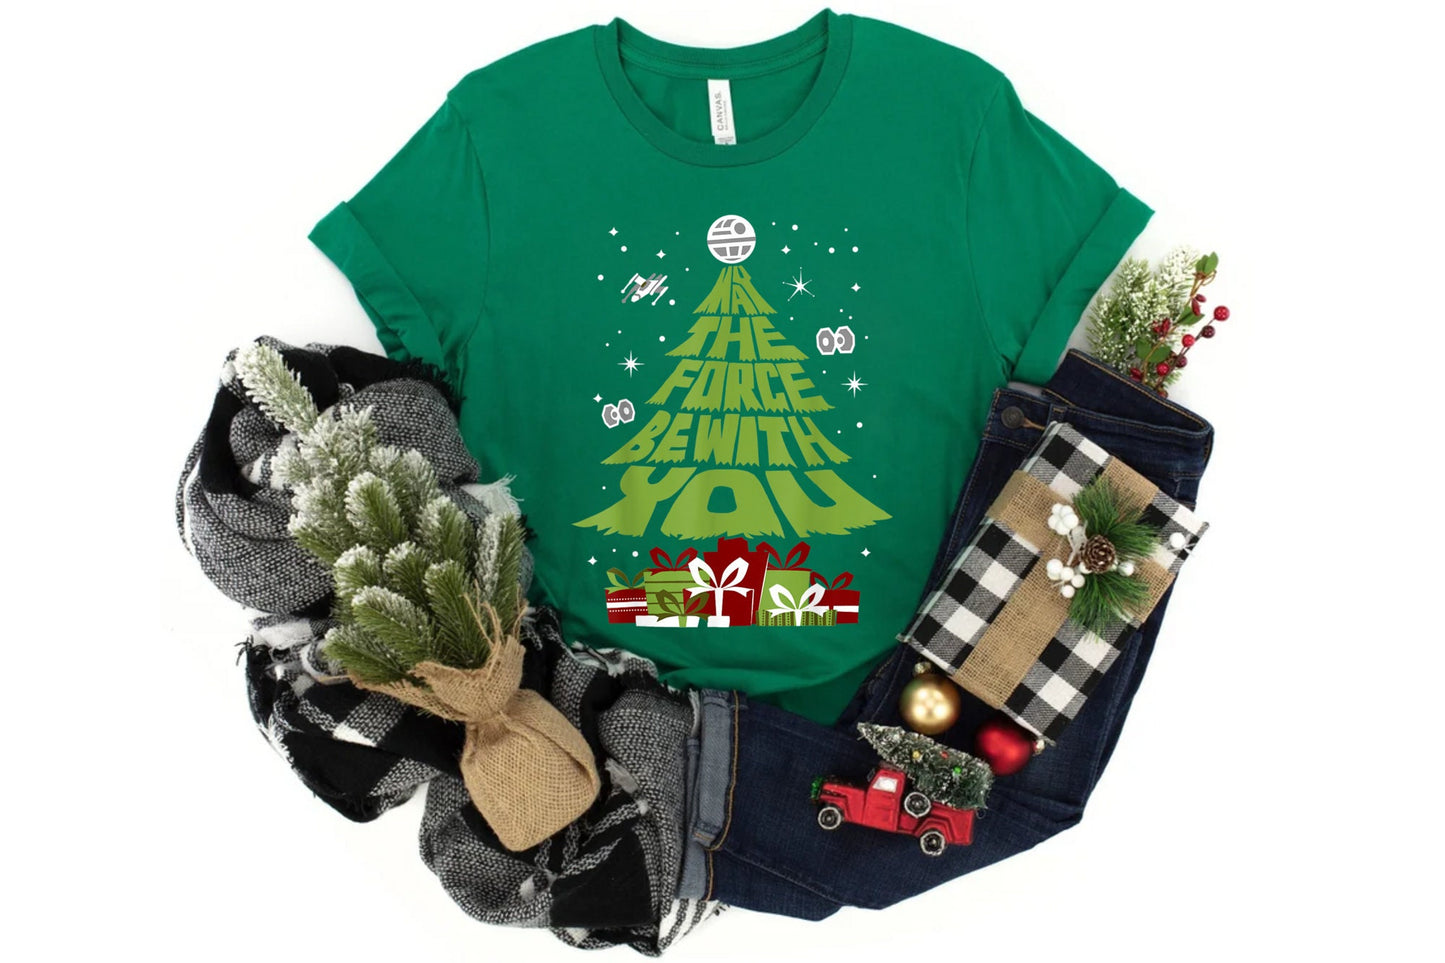 May the Force Be With You Christmas Tree Shirt, Disney Inspired Christmas Shirt, Star Wars Inspired Christmas Shirt, Holiday Shirt